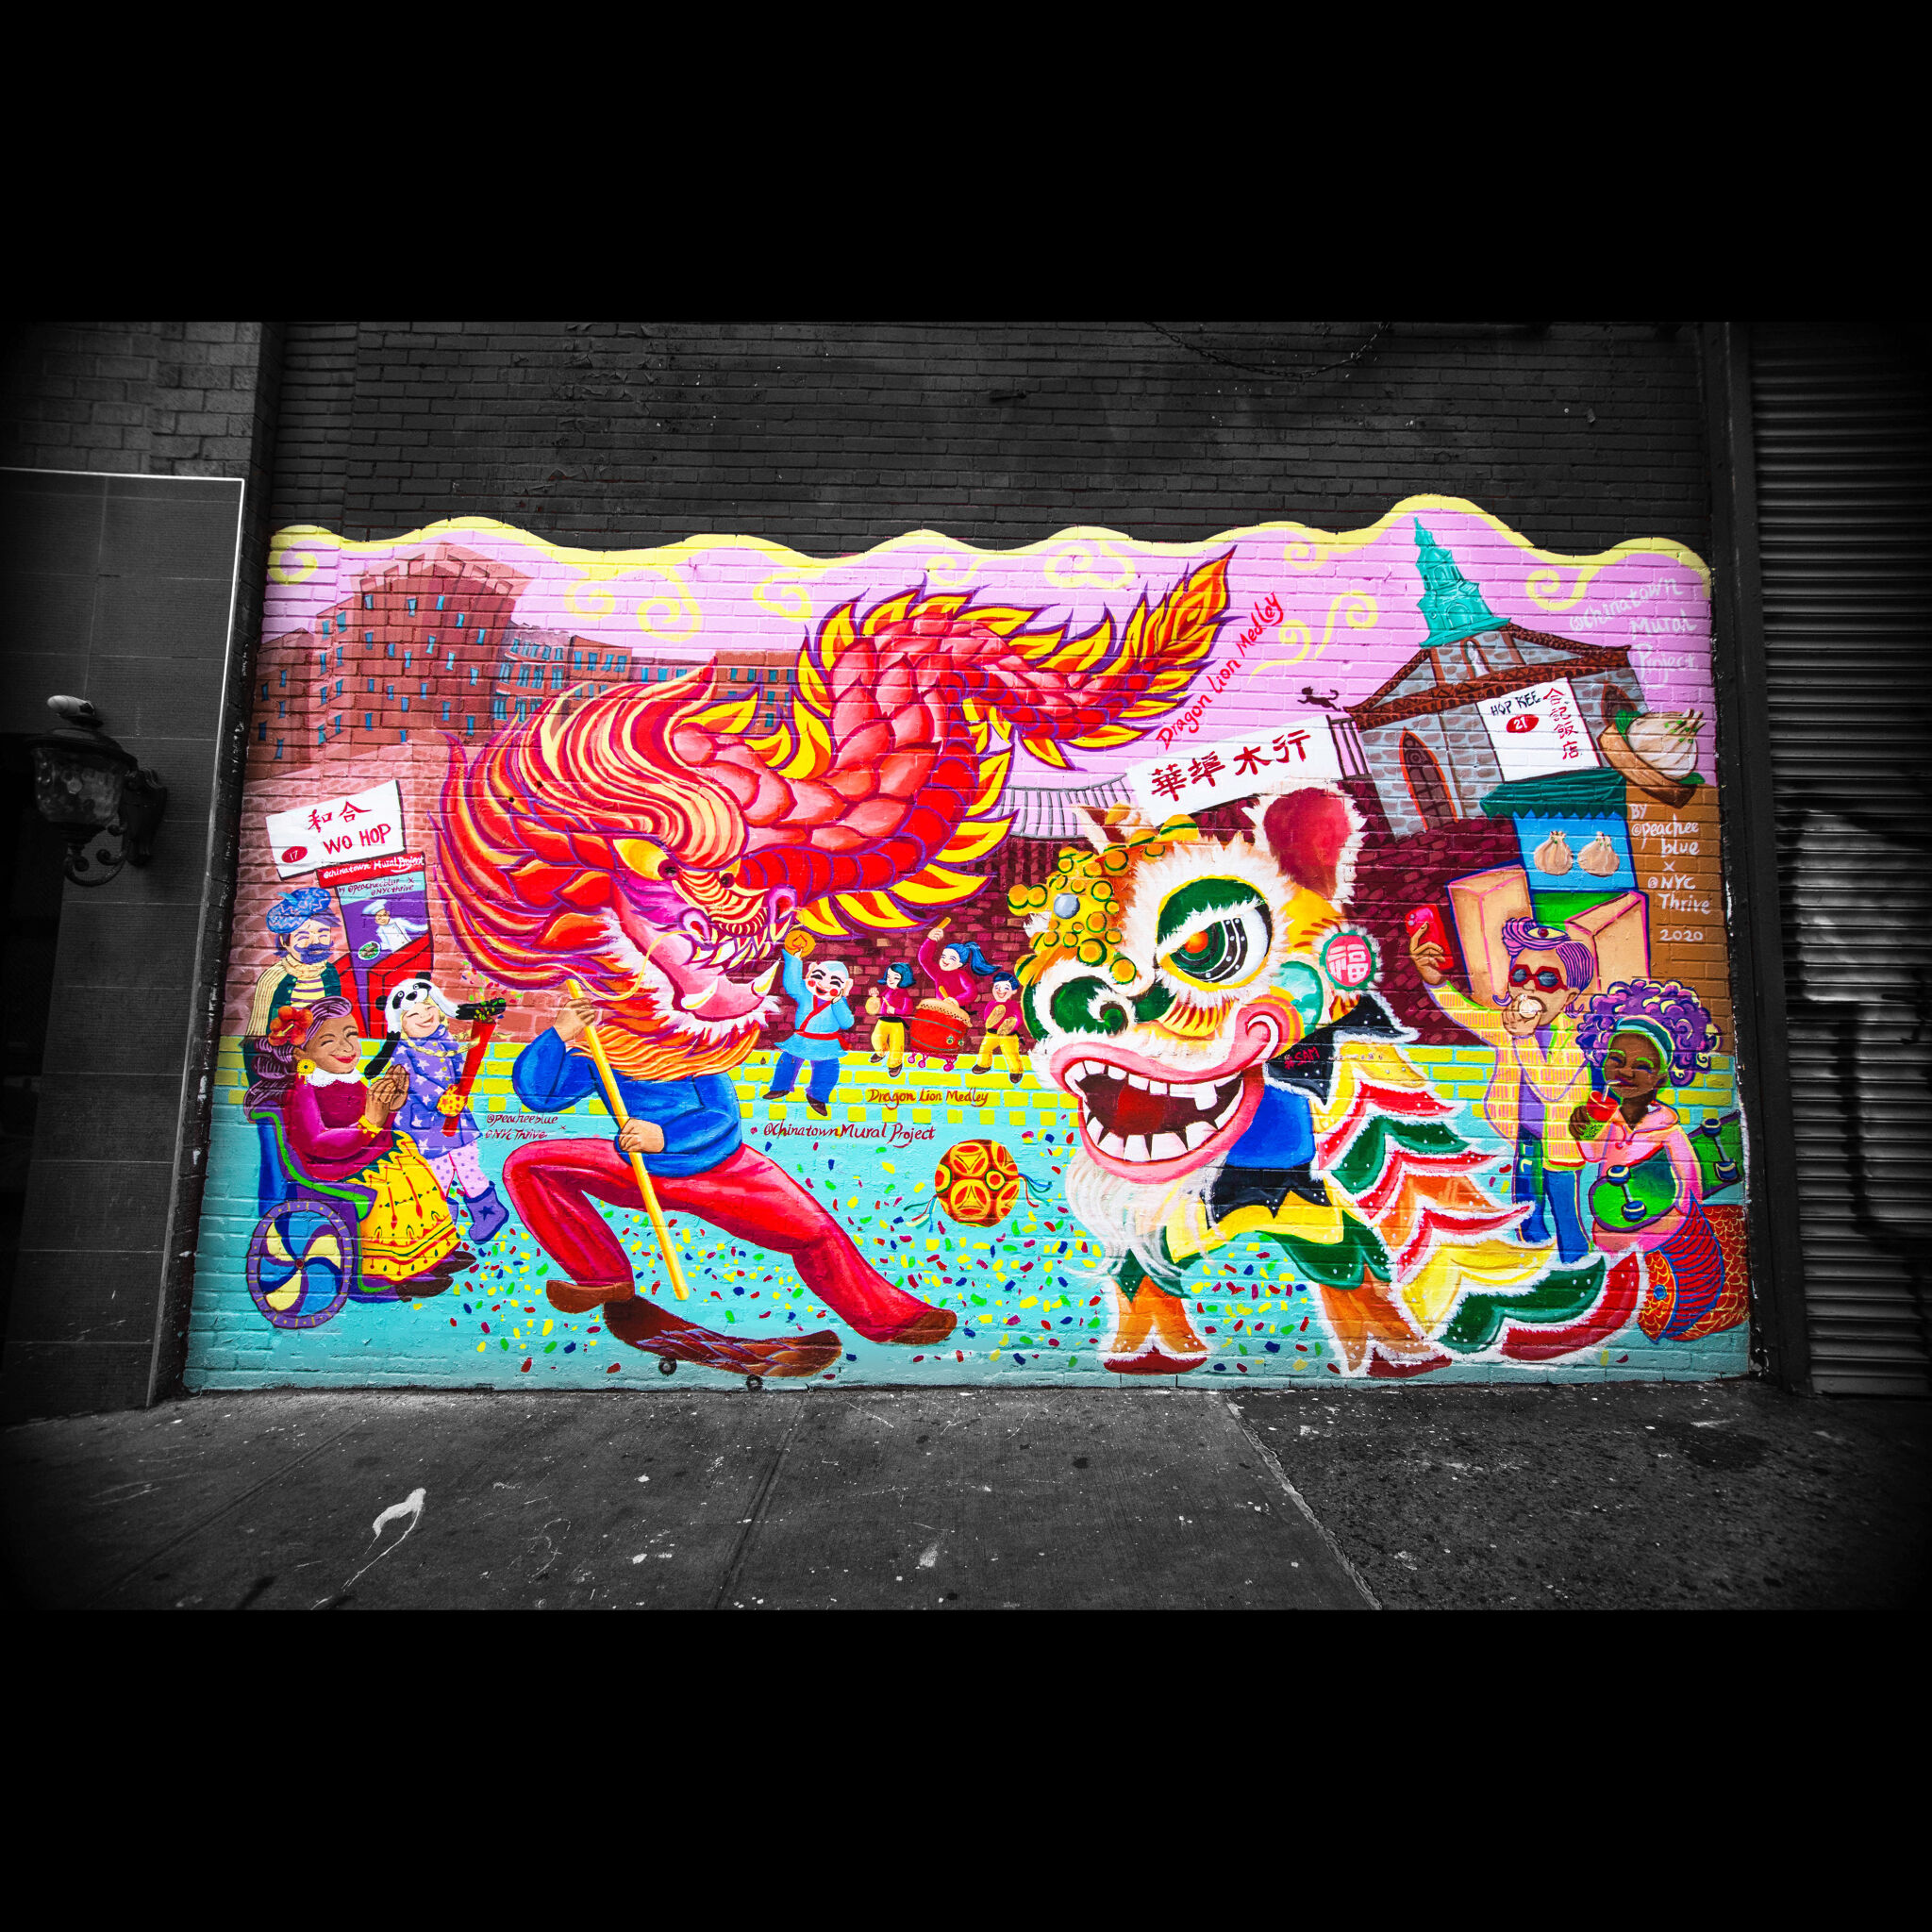 Peach Tao, Chinatown Mural Project, nycthrive&mdash;Dragon Lion Medley